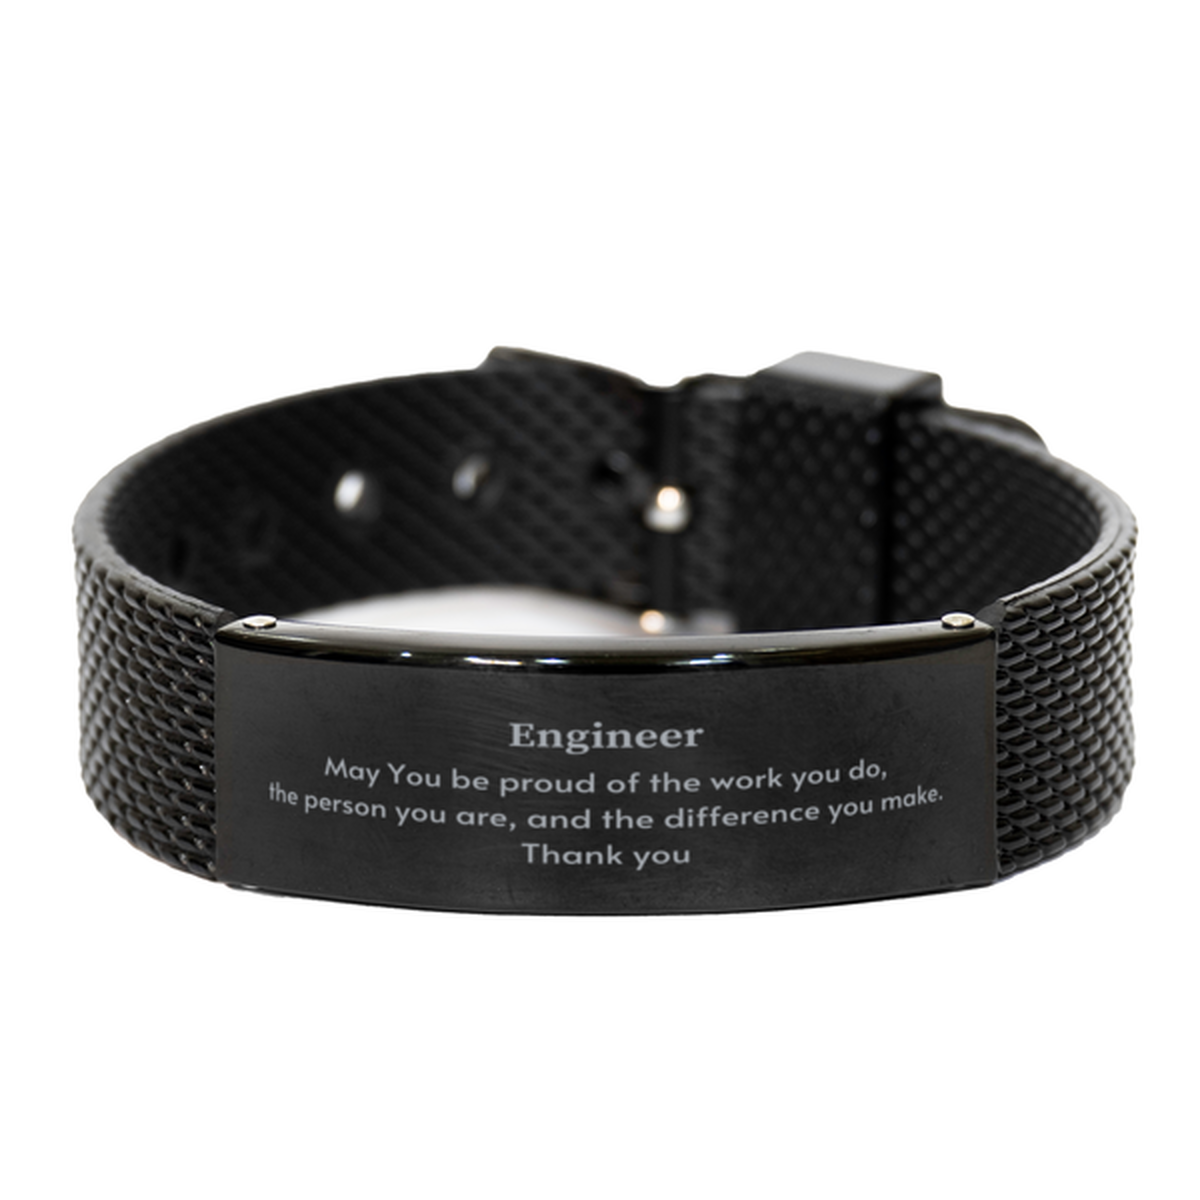 Heartwarming Black Shark Mesh Bracelet Retirement Coworkers Gifts for Engineer, Engineer May You be proud of the work you do, the person you are Gifts for Boss Men Women Friends